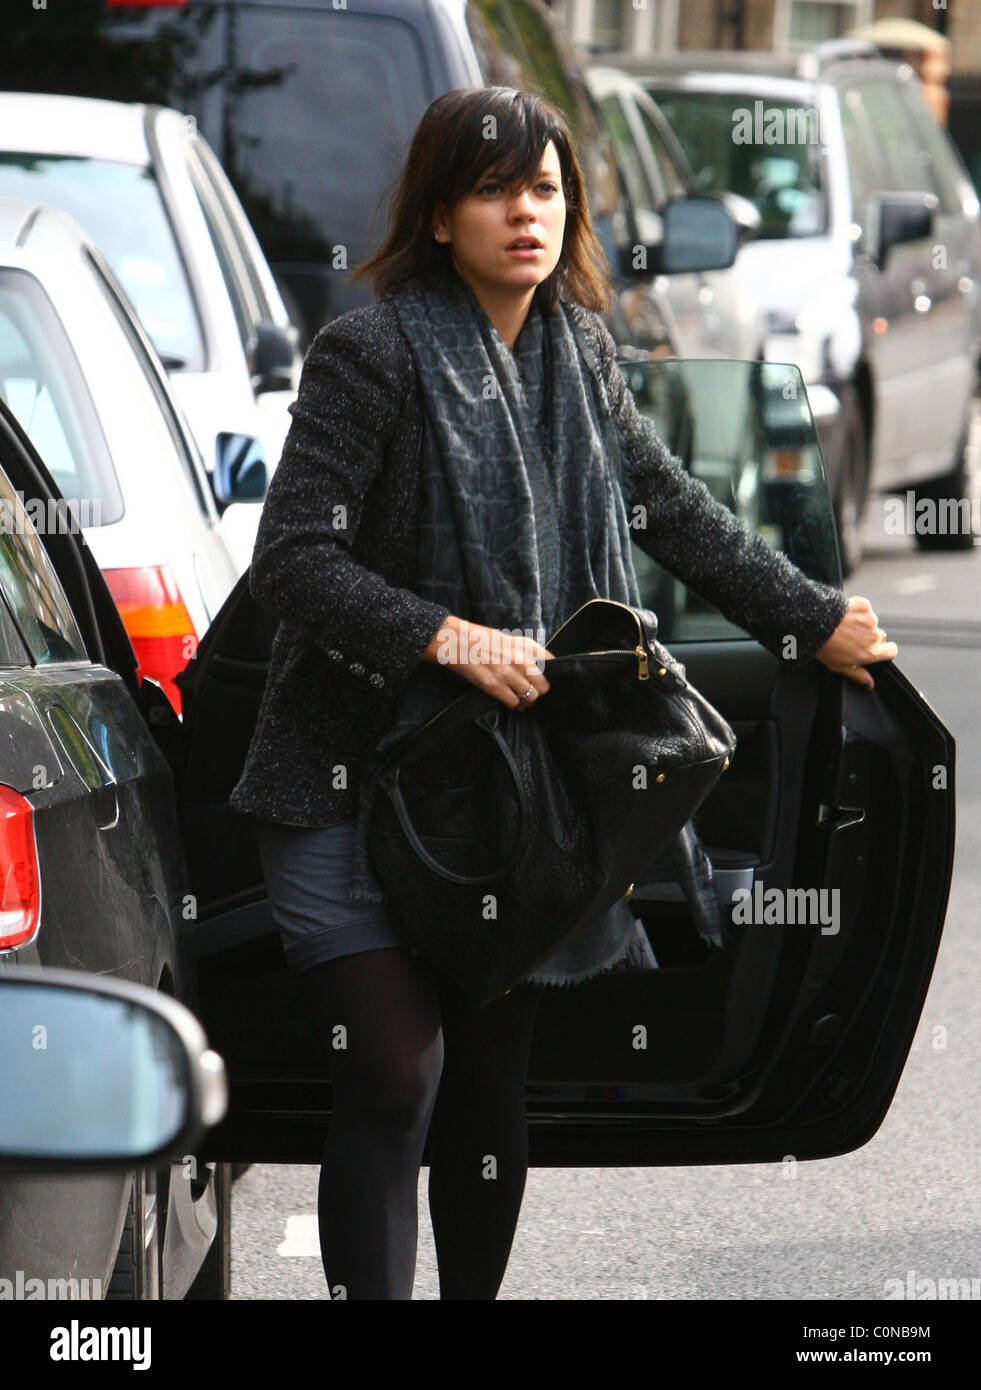 Lily Allen on her way to a meeting London, England - 06.10.08 A. Benjilali / Stock Photo